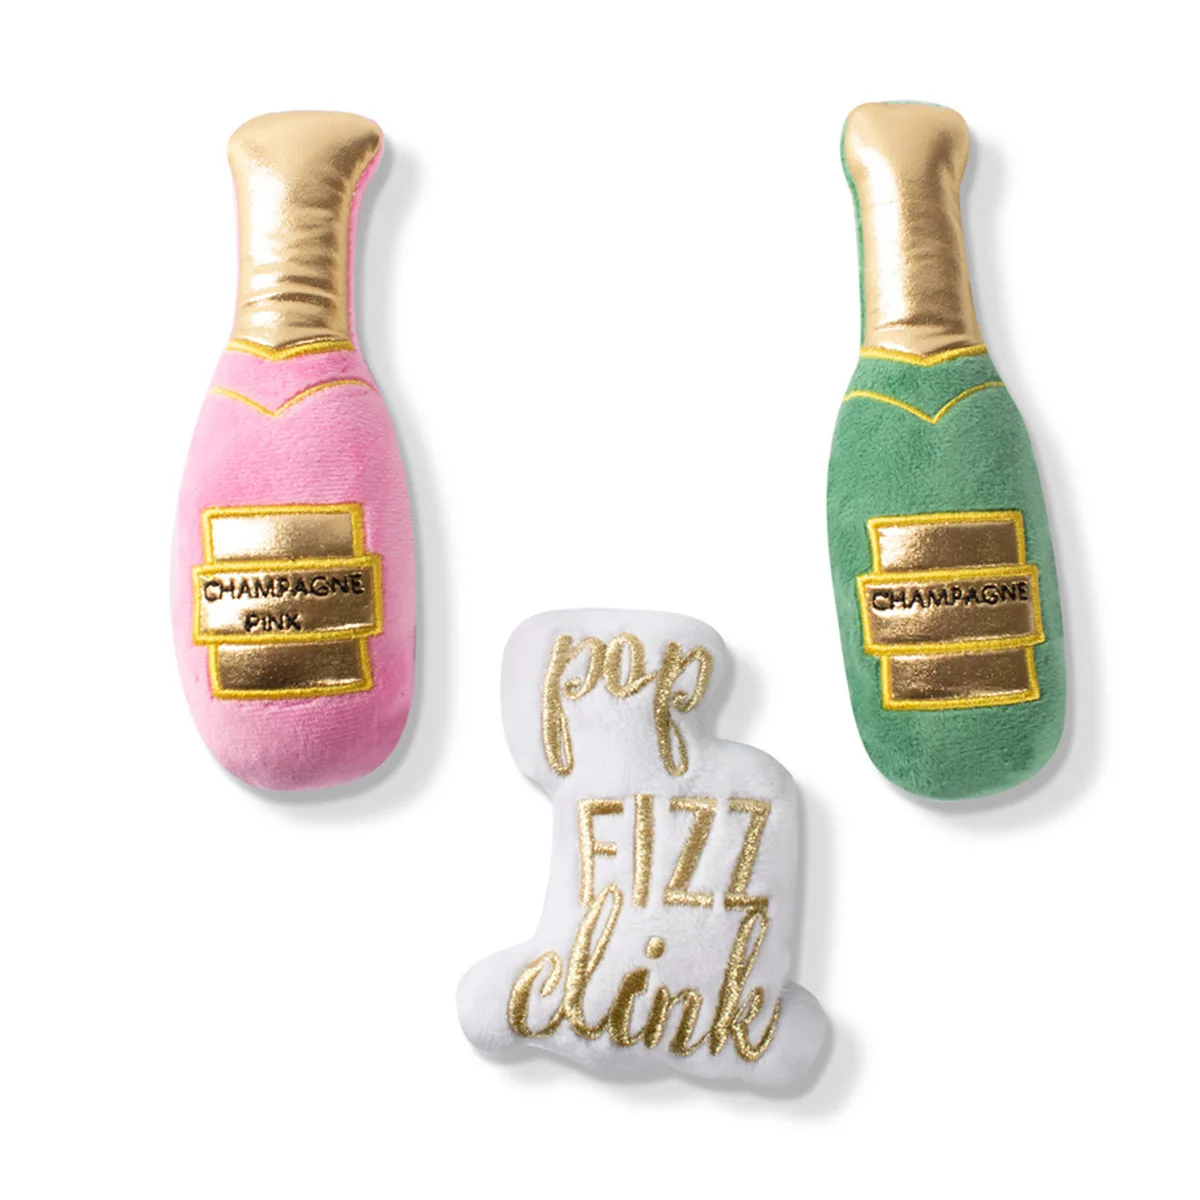 Champagne 3-Piece Small Dog Toy Sets - The Fringe Studio